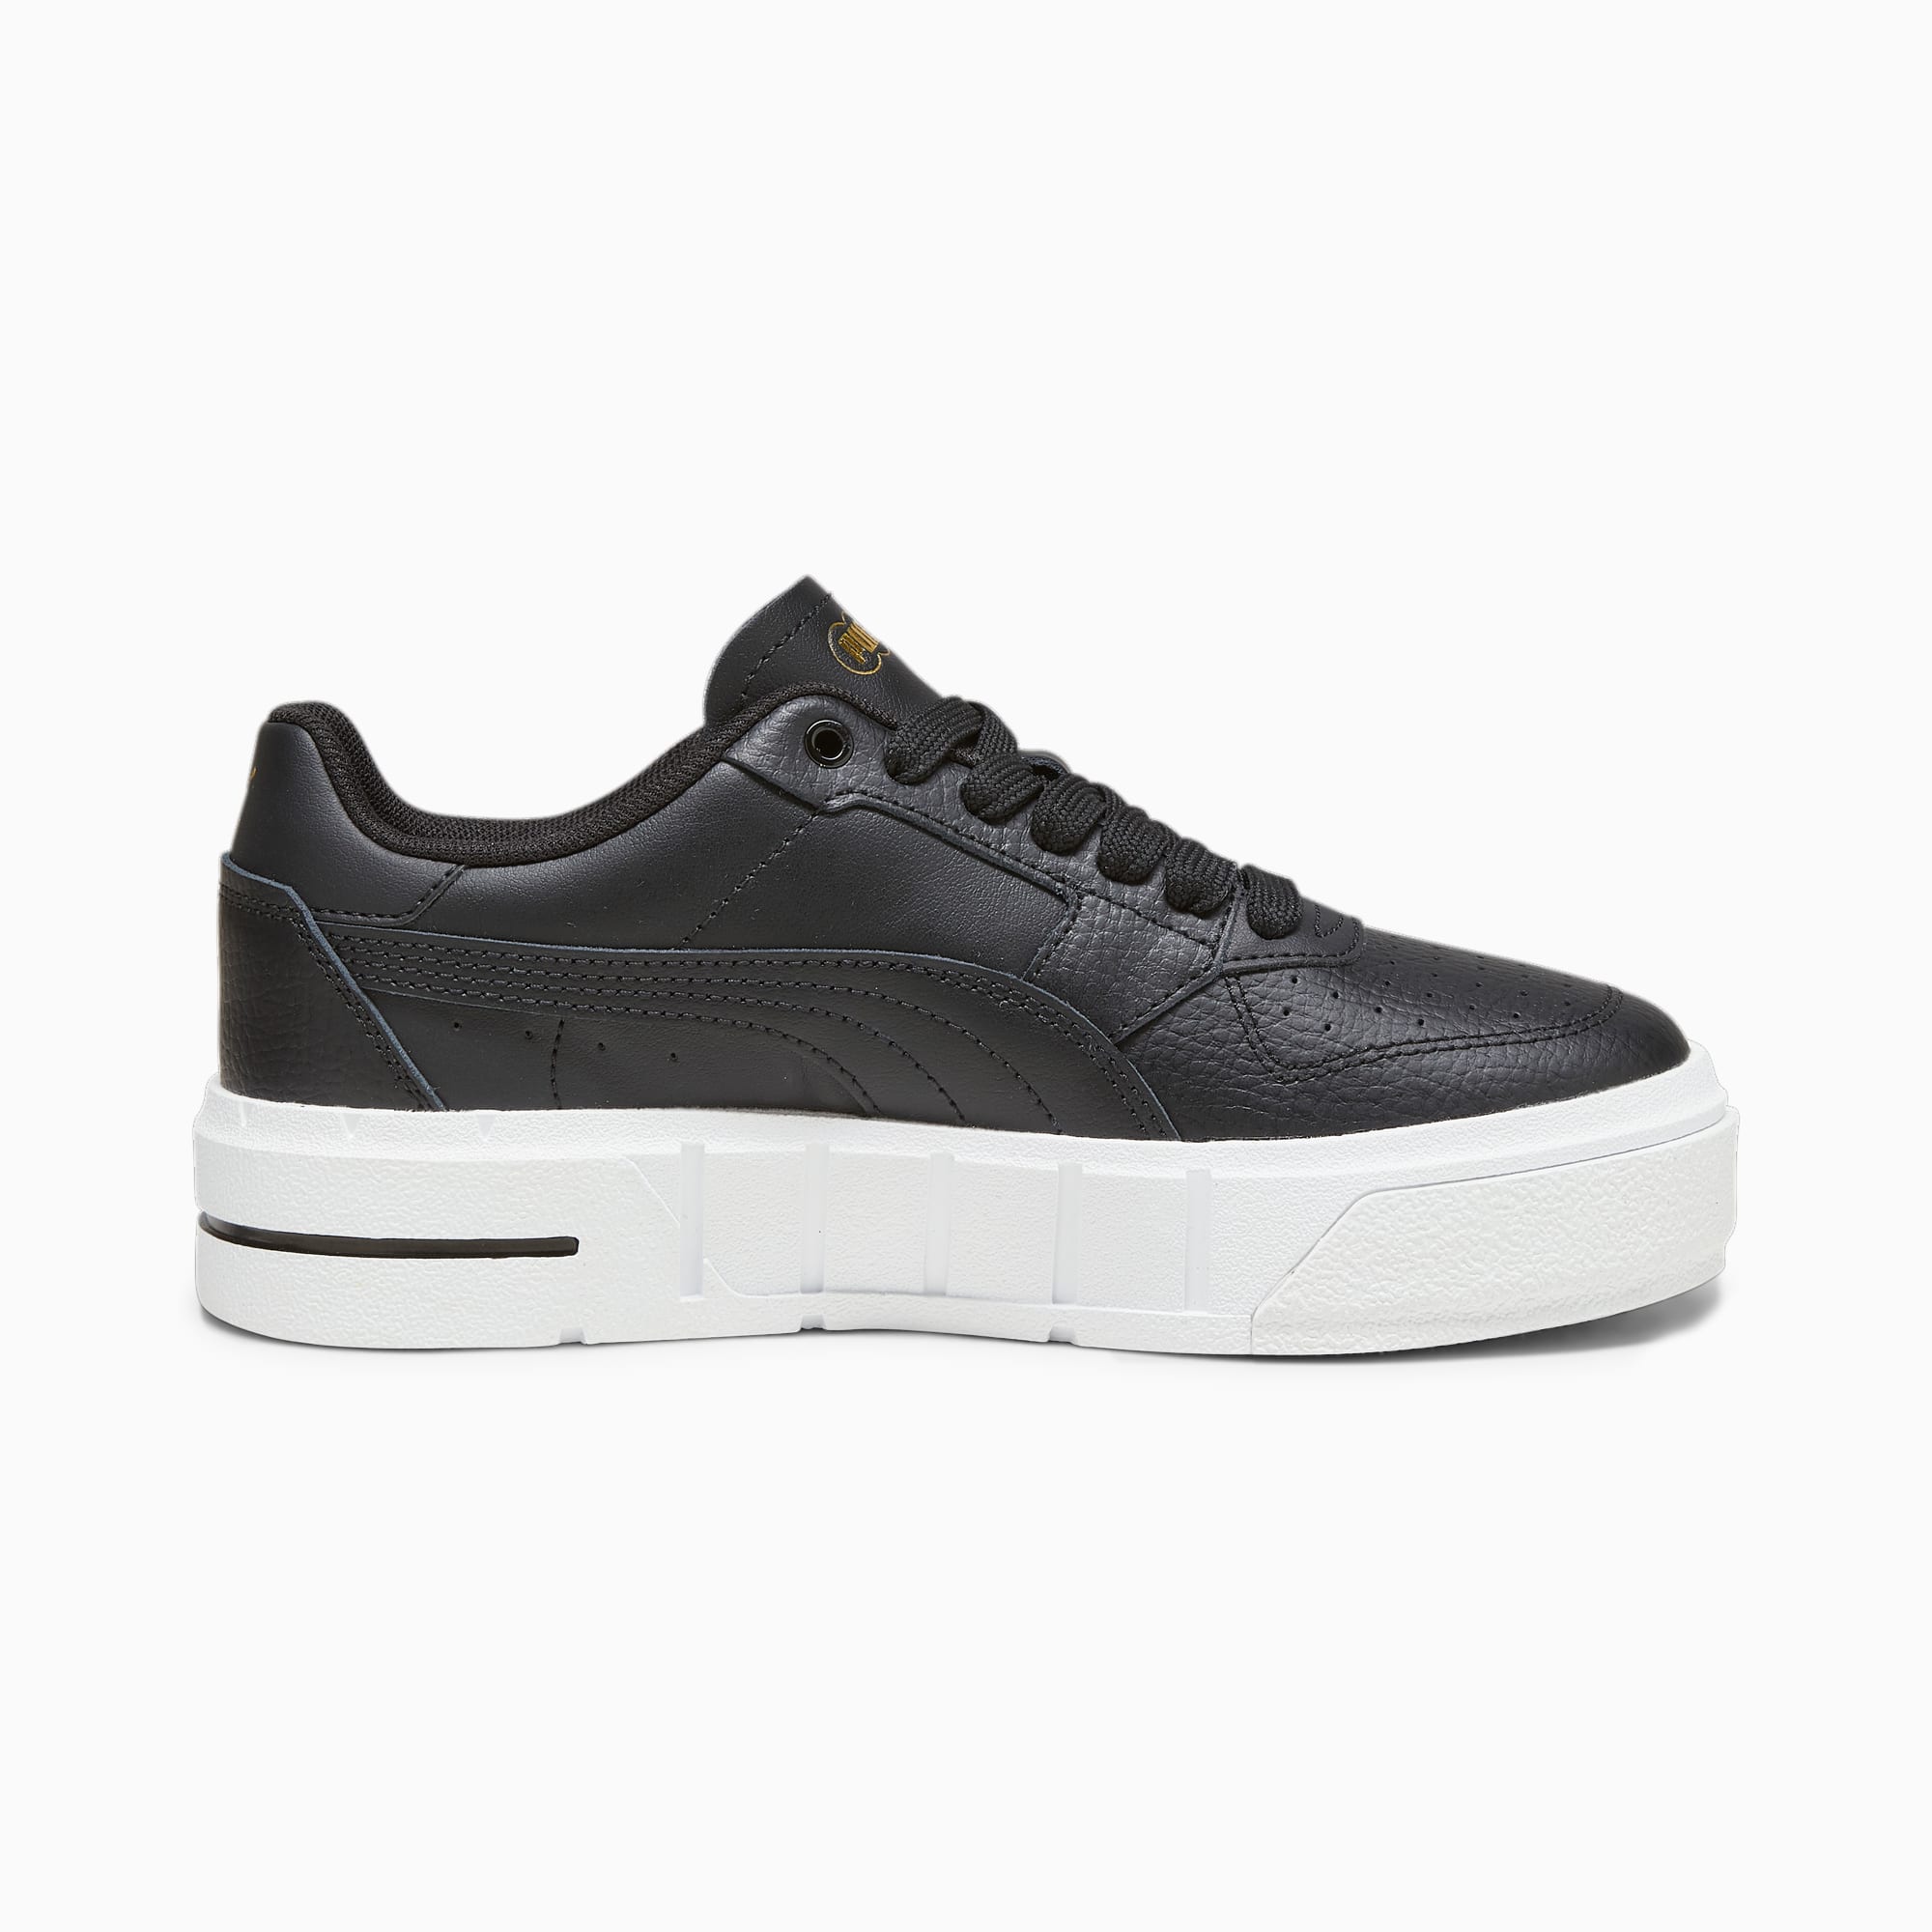 PUMA Cali Court Youth Leather Sneakers, Black/White